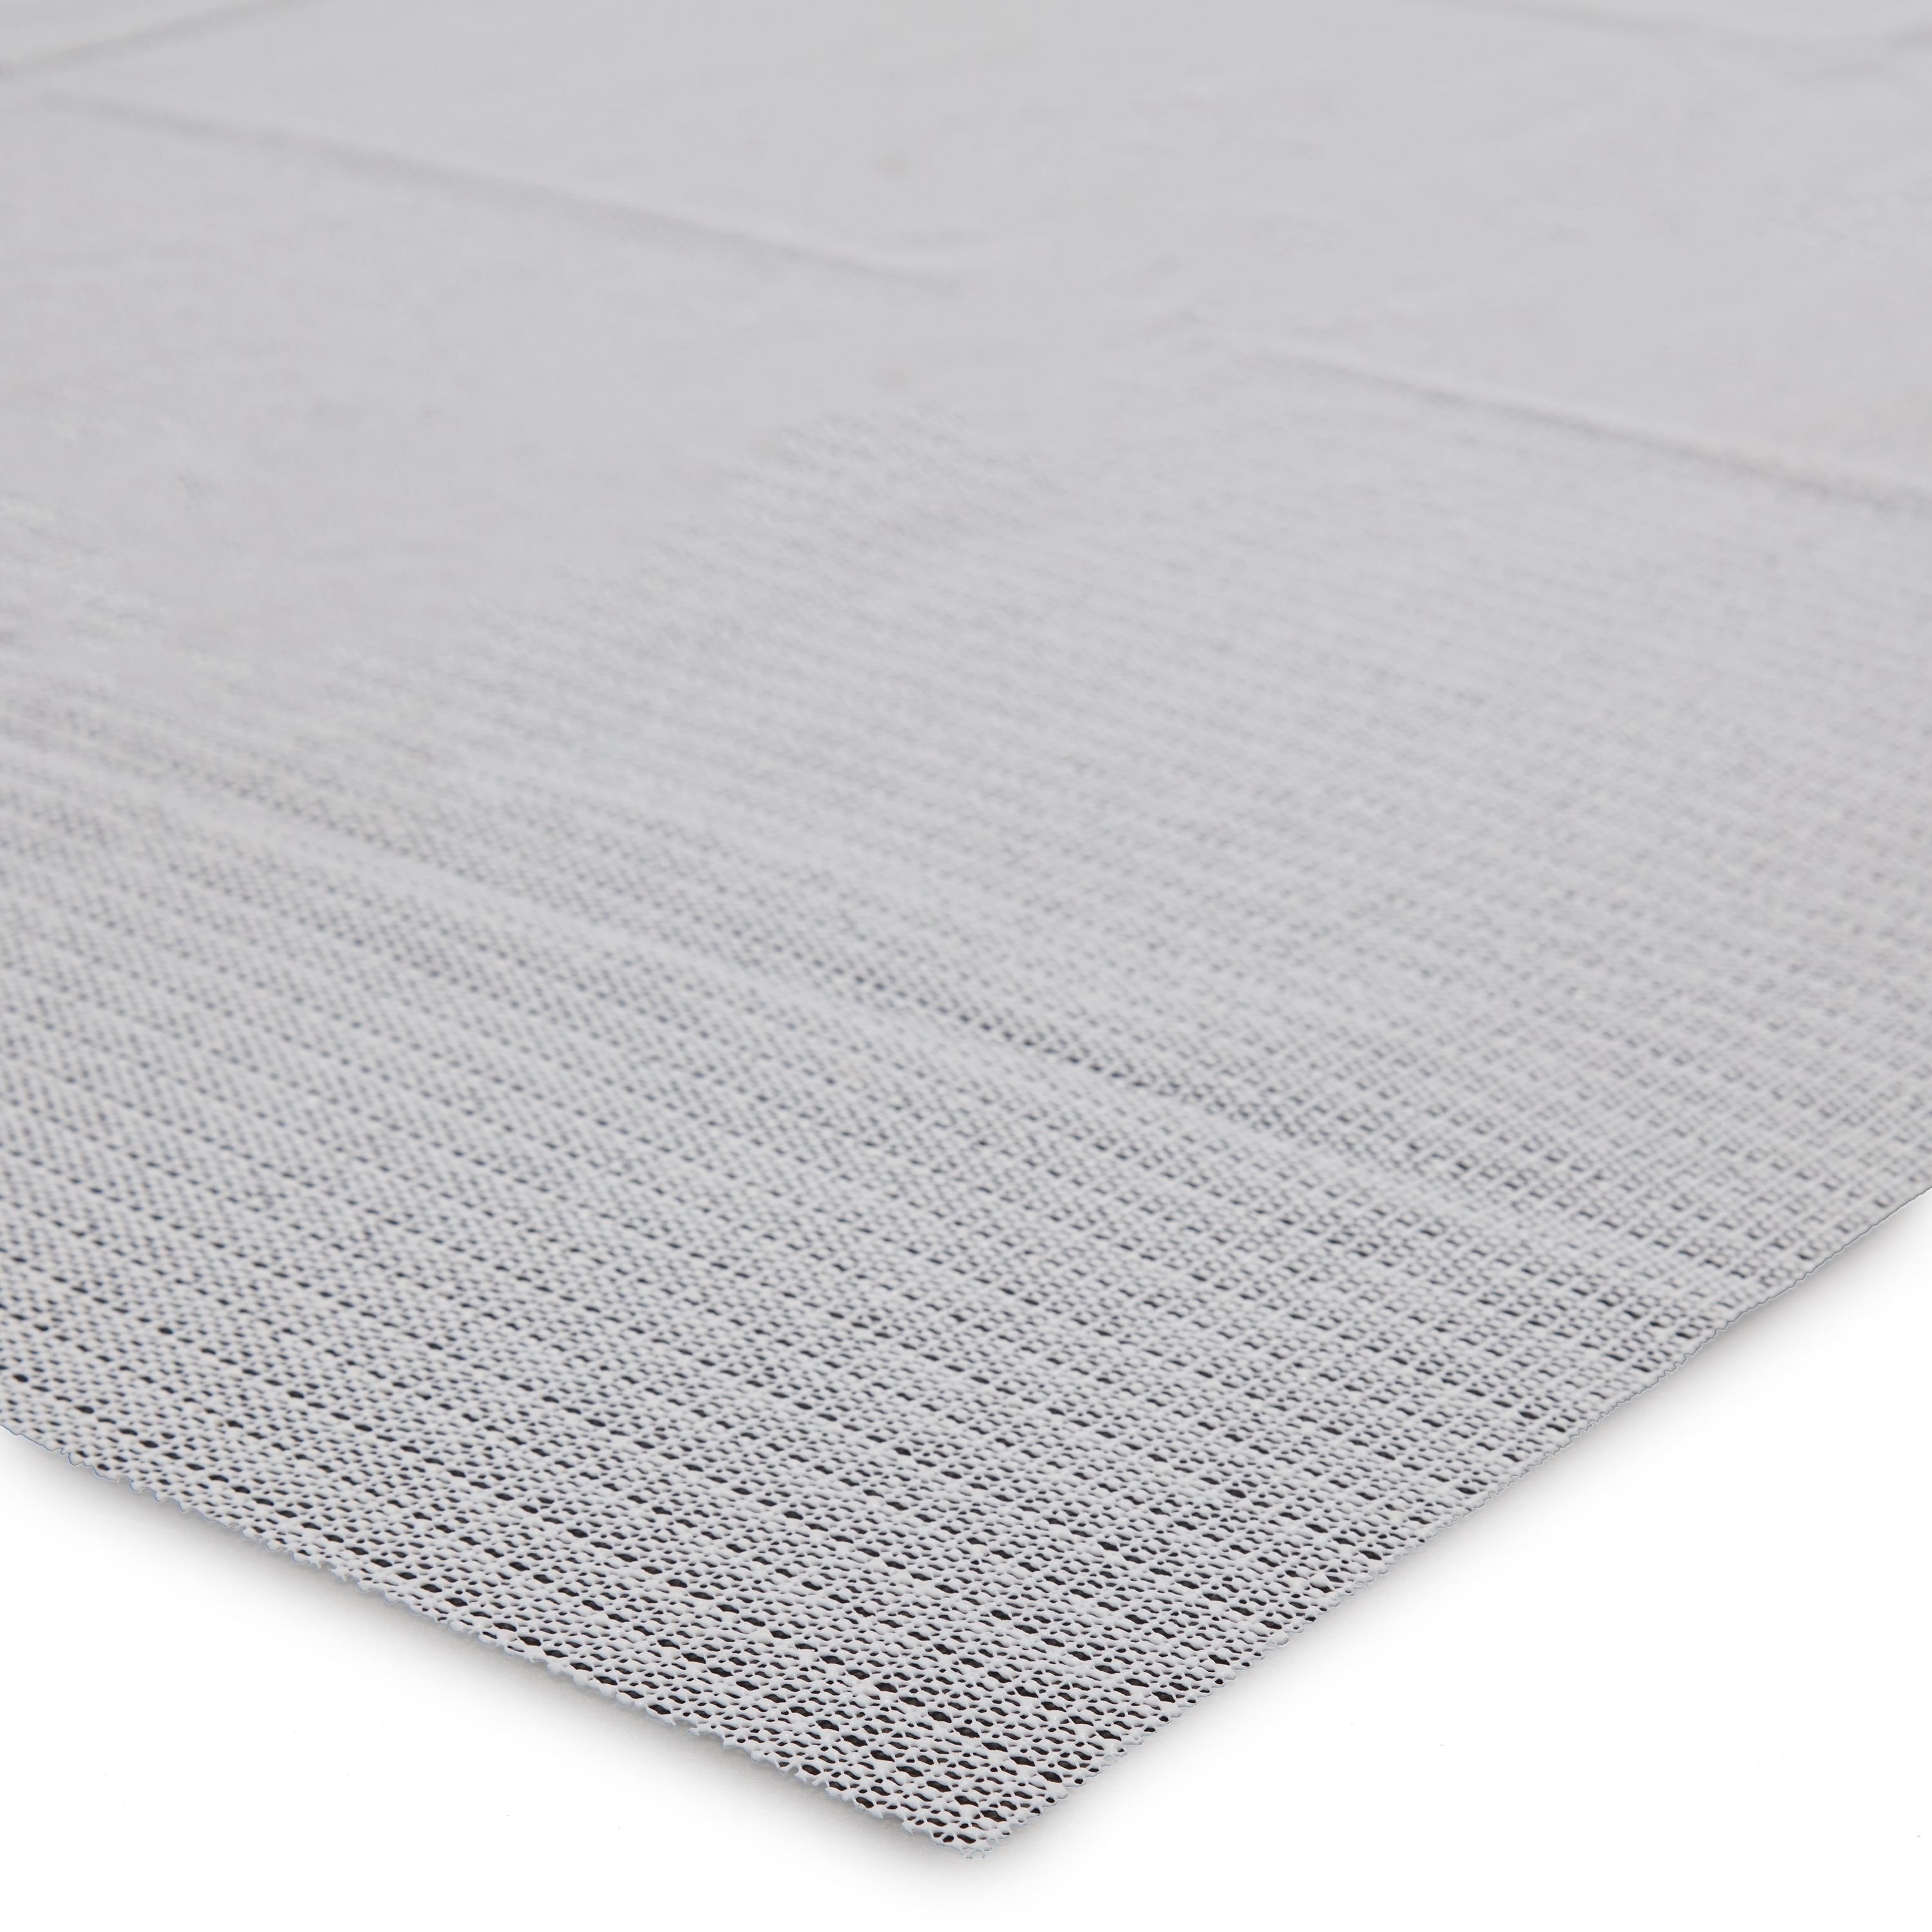 Deluxe Hold Rug Pad (9'X12') - Image 1